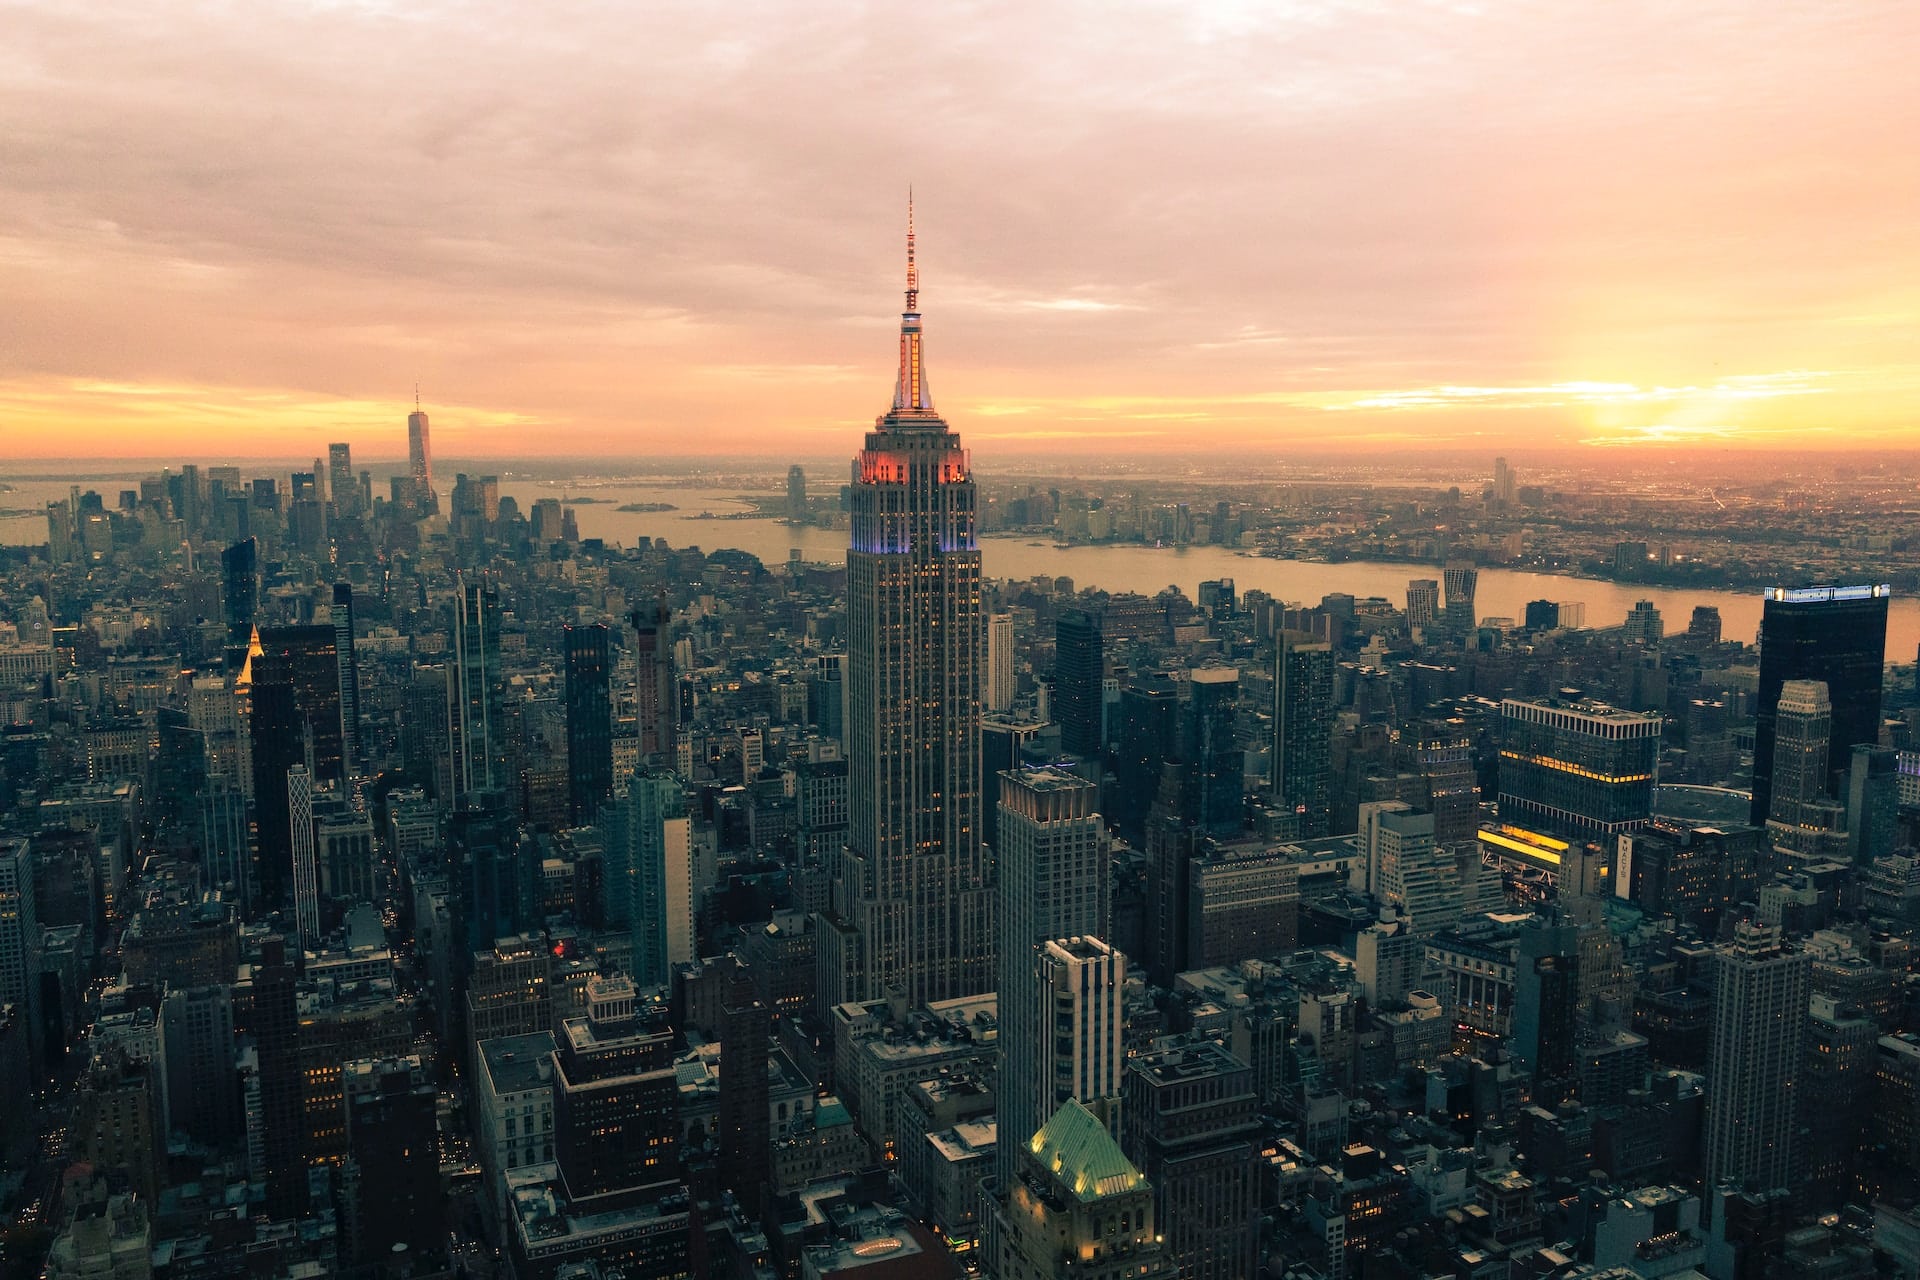 Image Title: Business Contacts Image Description: Sunset view of New York City Alt Text: Conferences in New York City Source: https://unsplash.com/photos/an-aerial-view-of-a-city-at-sunset-ljrGb6OQRac